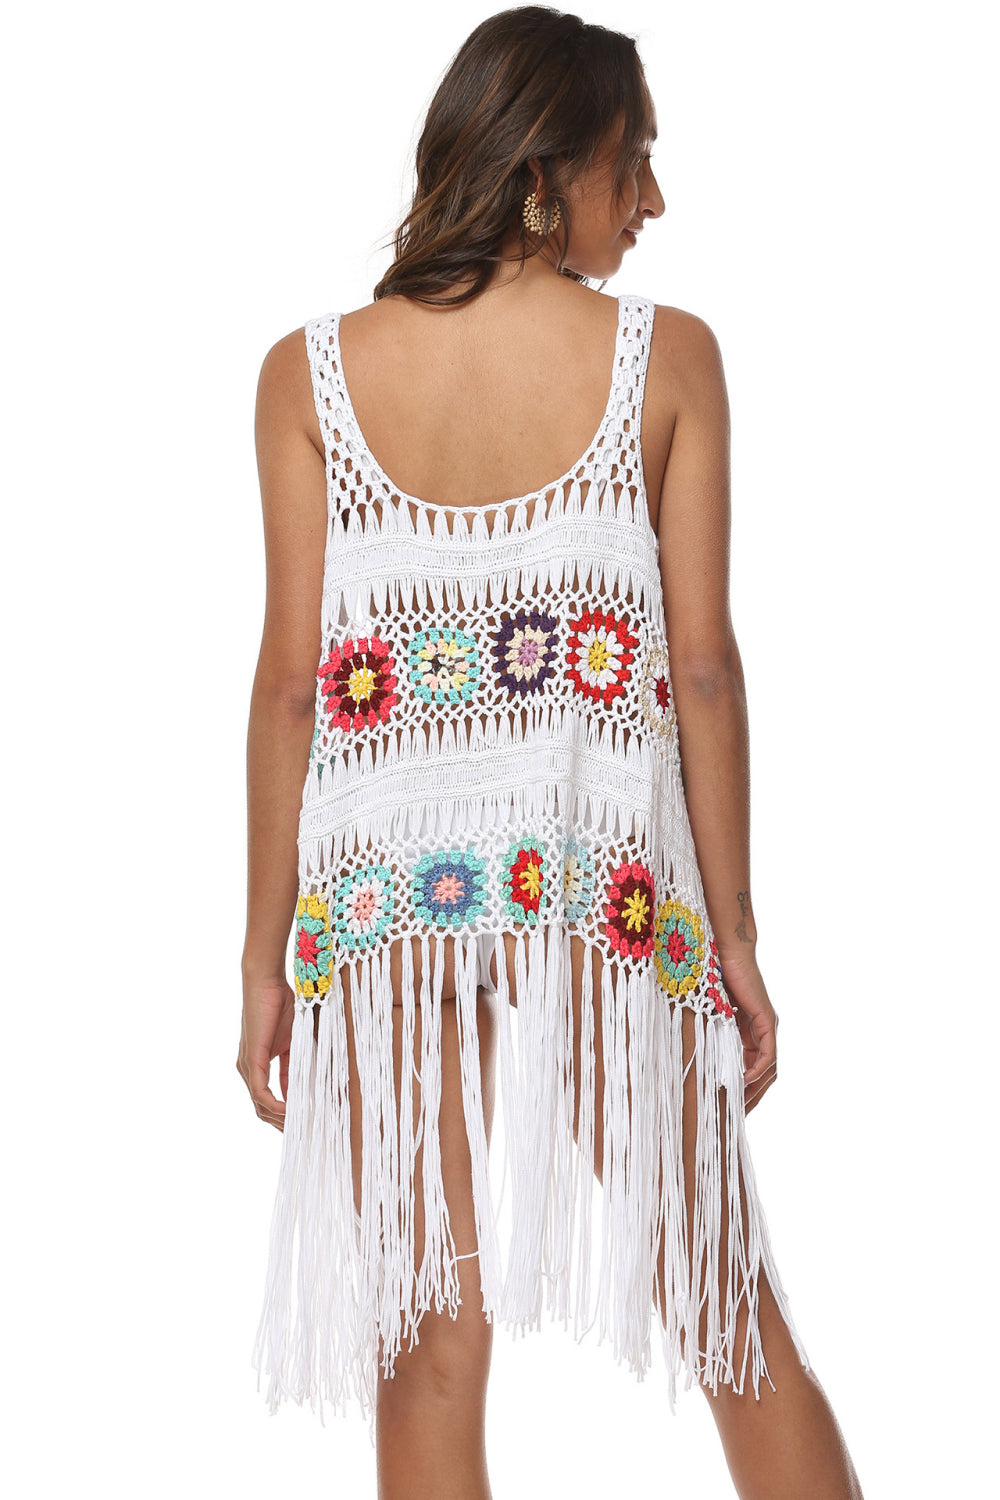 Openwork Fringe Detail Embroidery Sleeveless Cover-Up BLUE ZONE PLANET